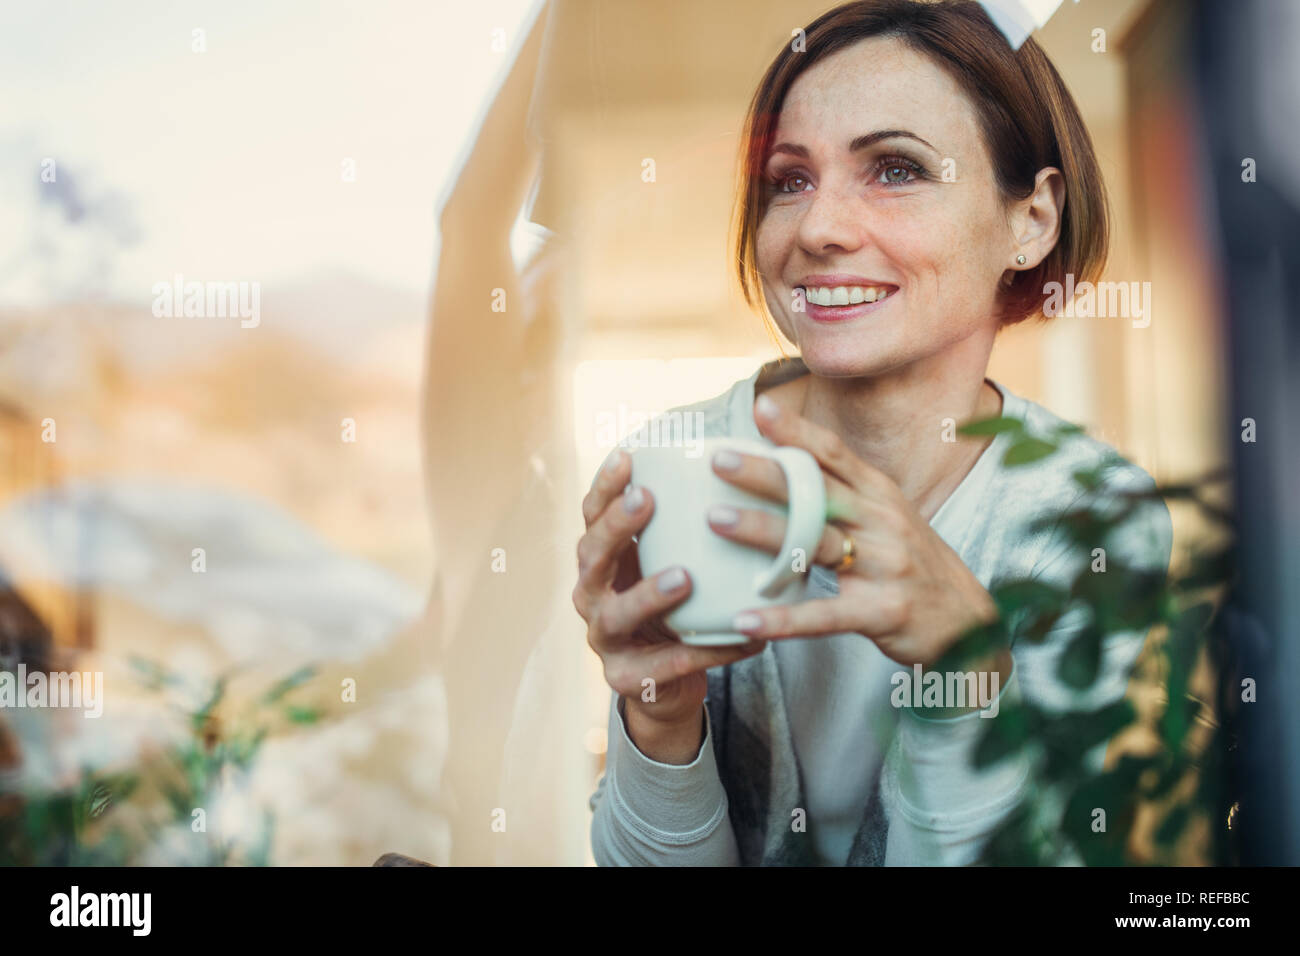 A young woman with cup of coffee looking out of a window. Shot through glass. Stock Photo